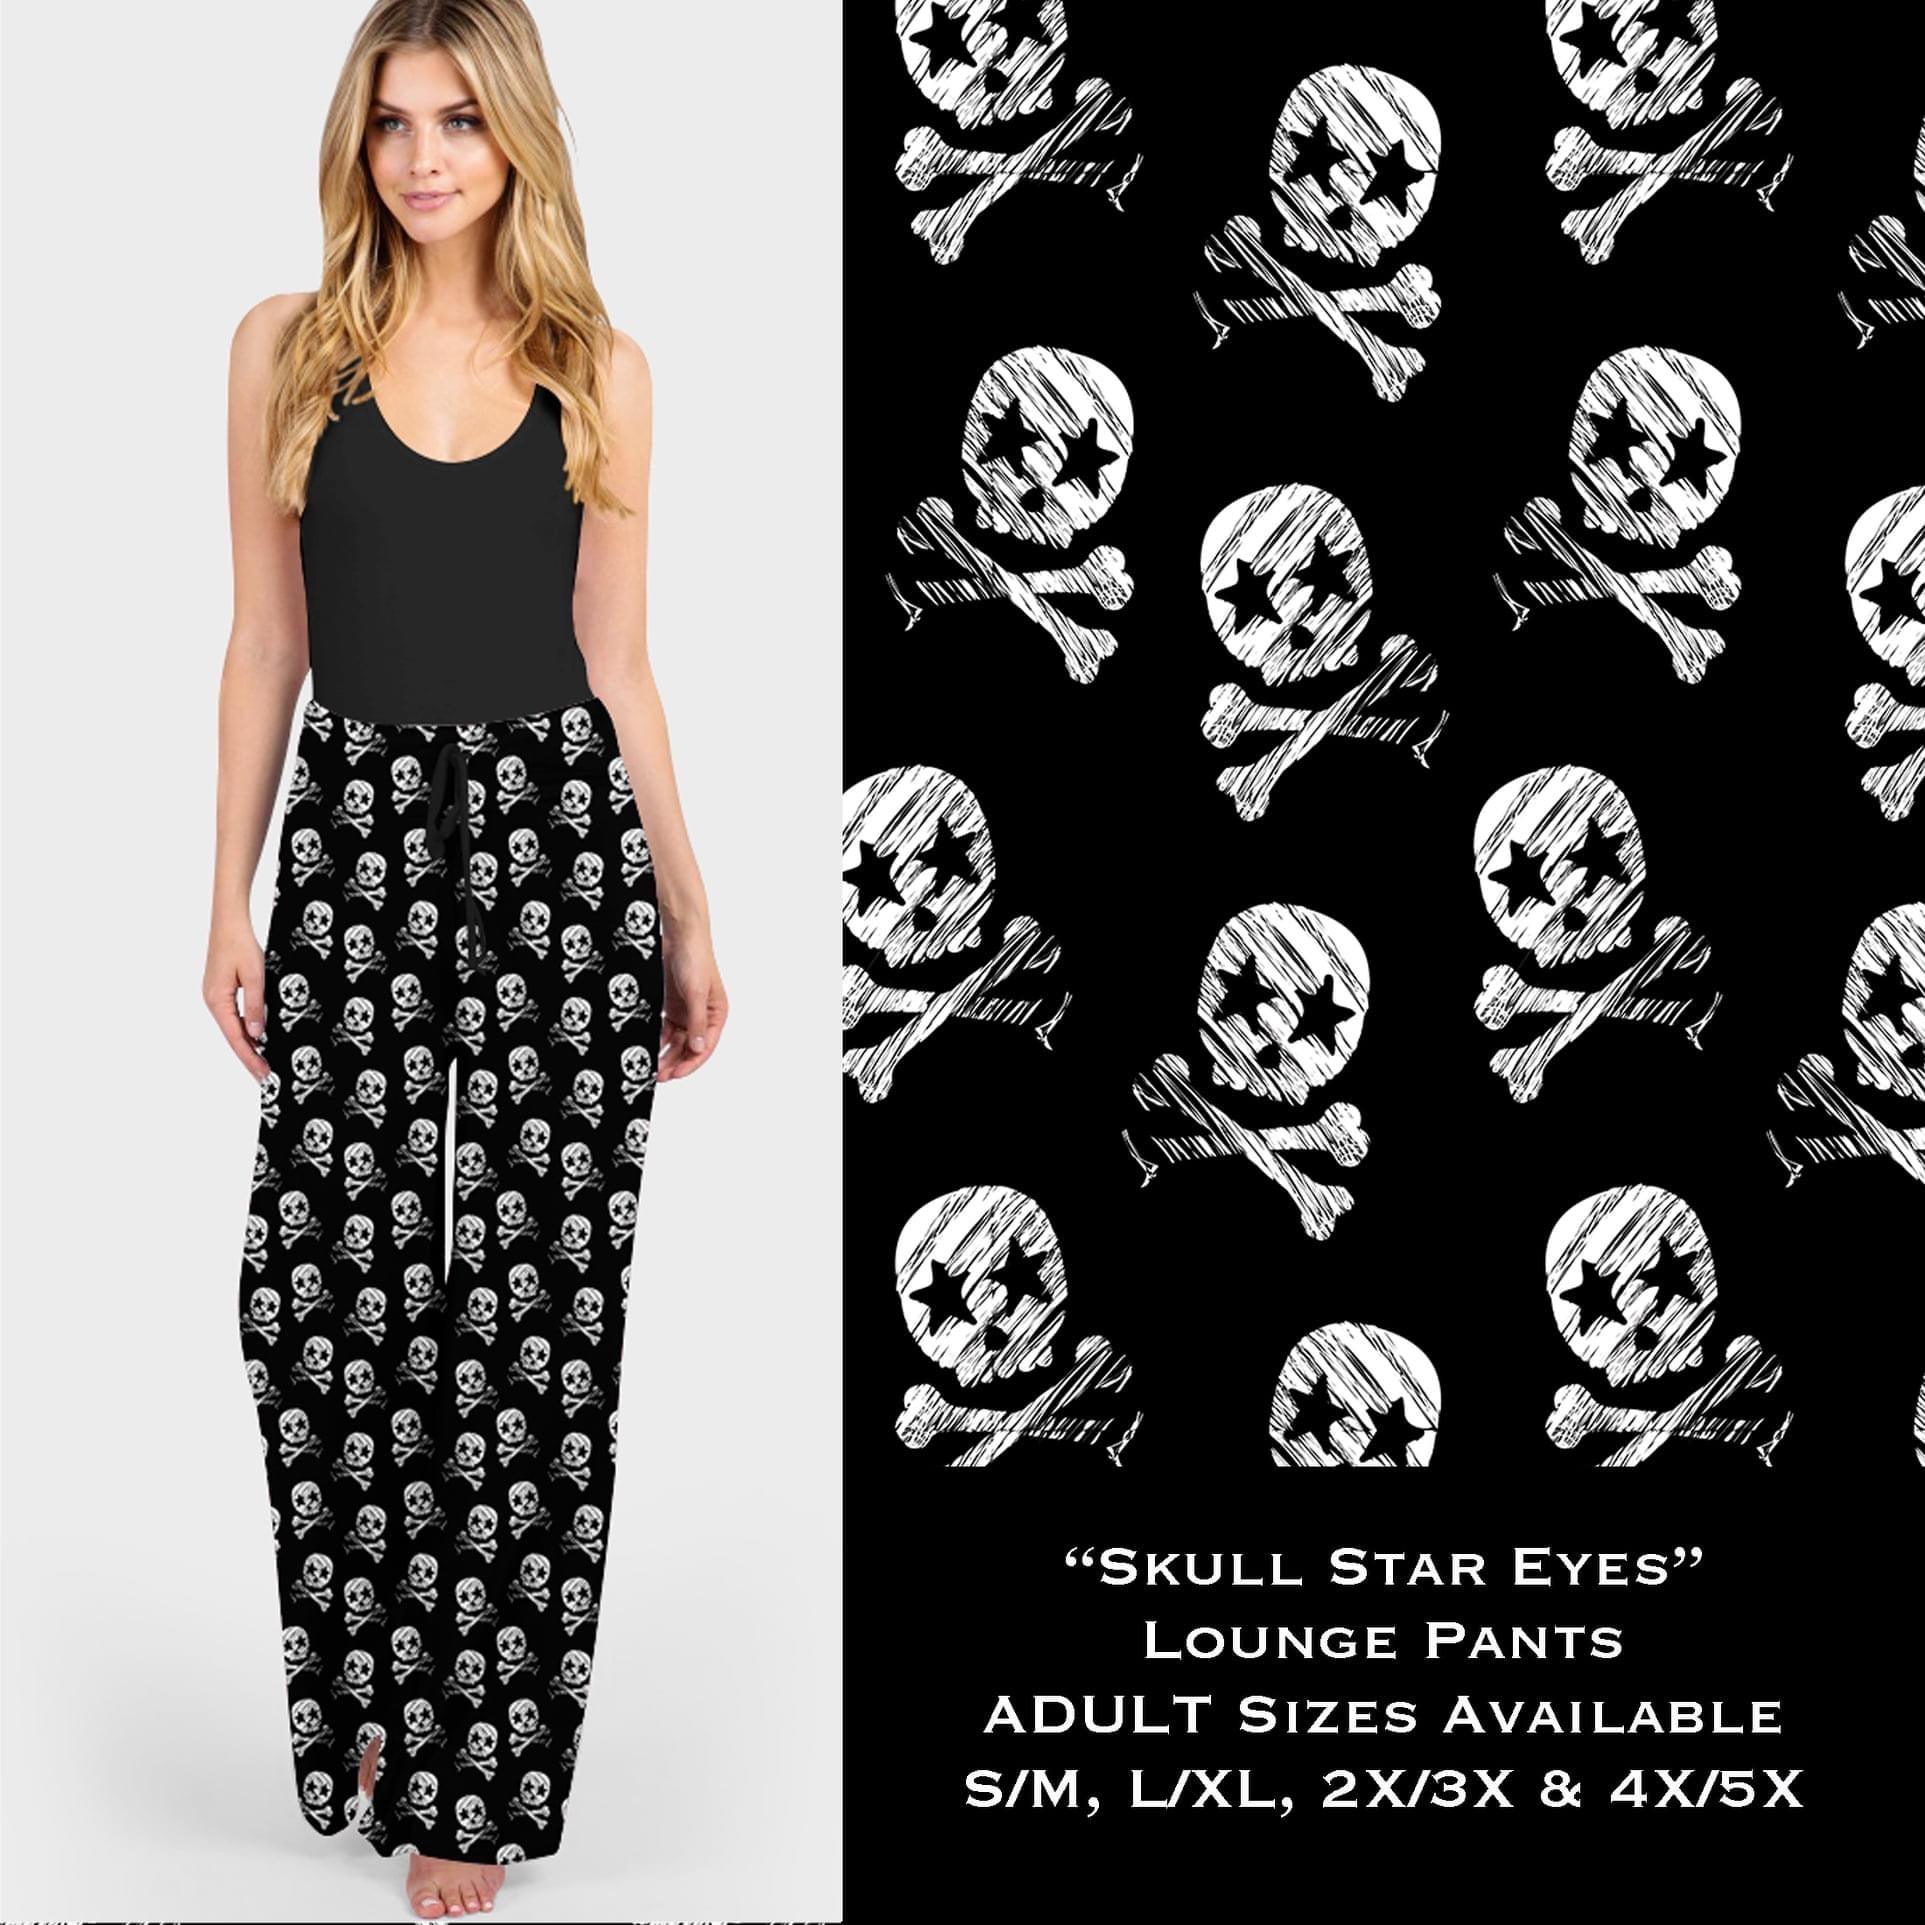 Skull Star Eyes - Lounge Pants - That’s So Fletch Boutique 